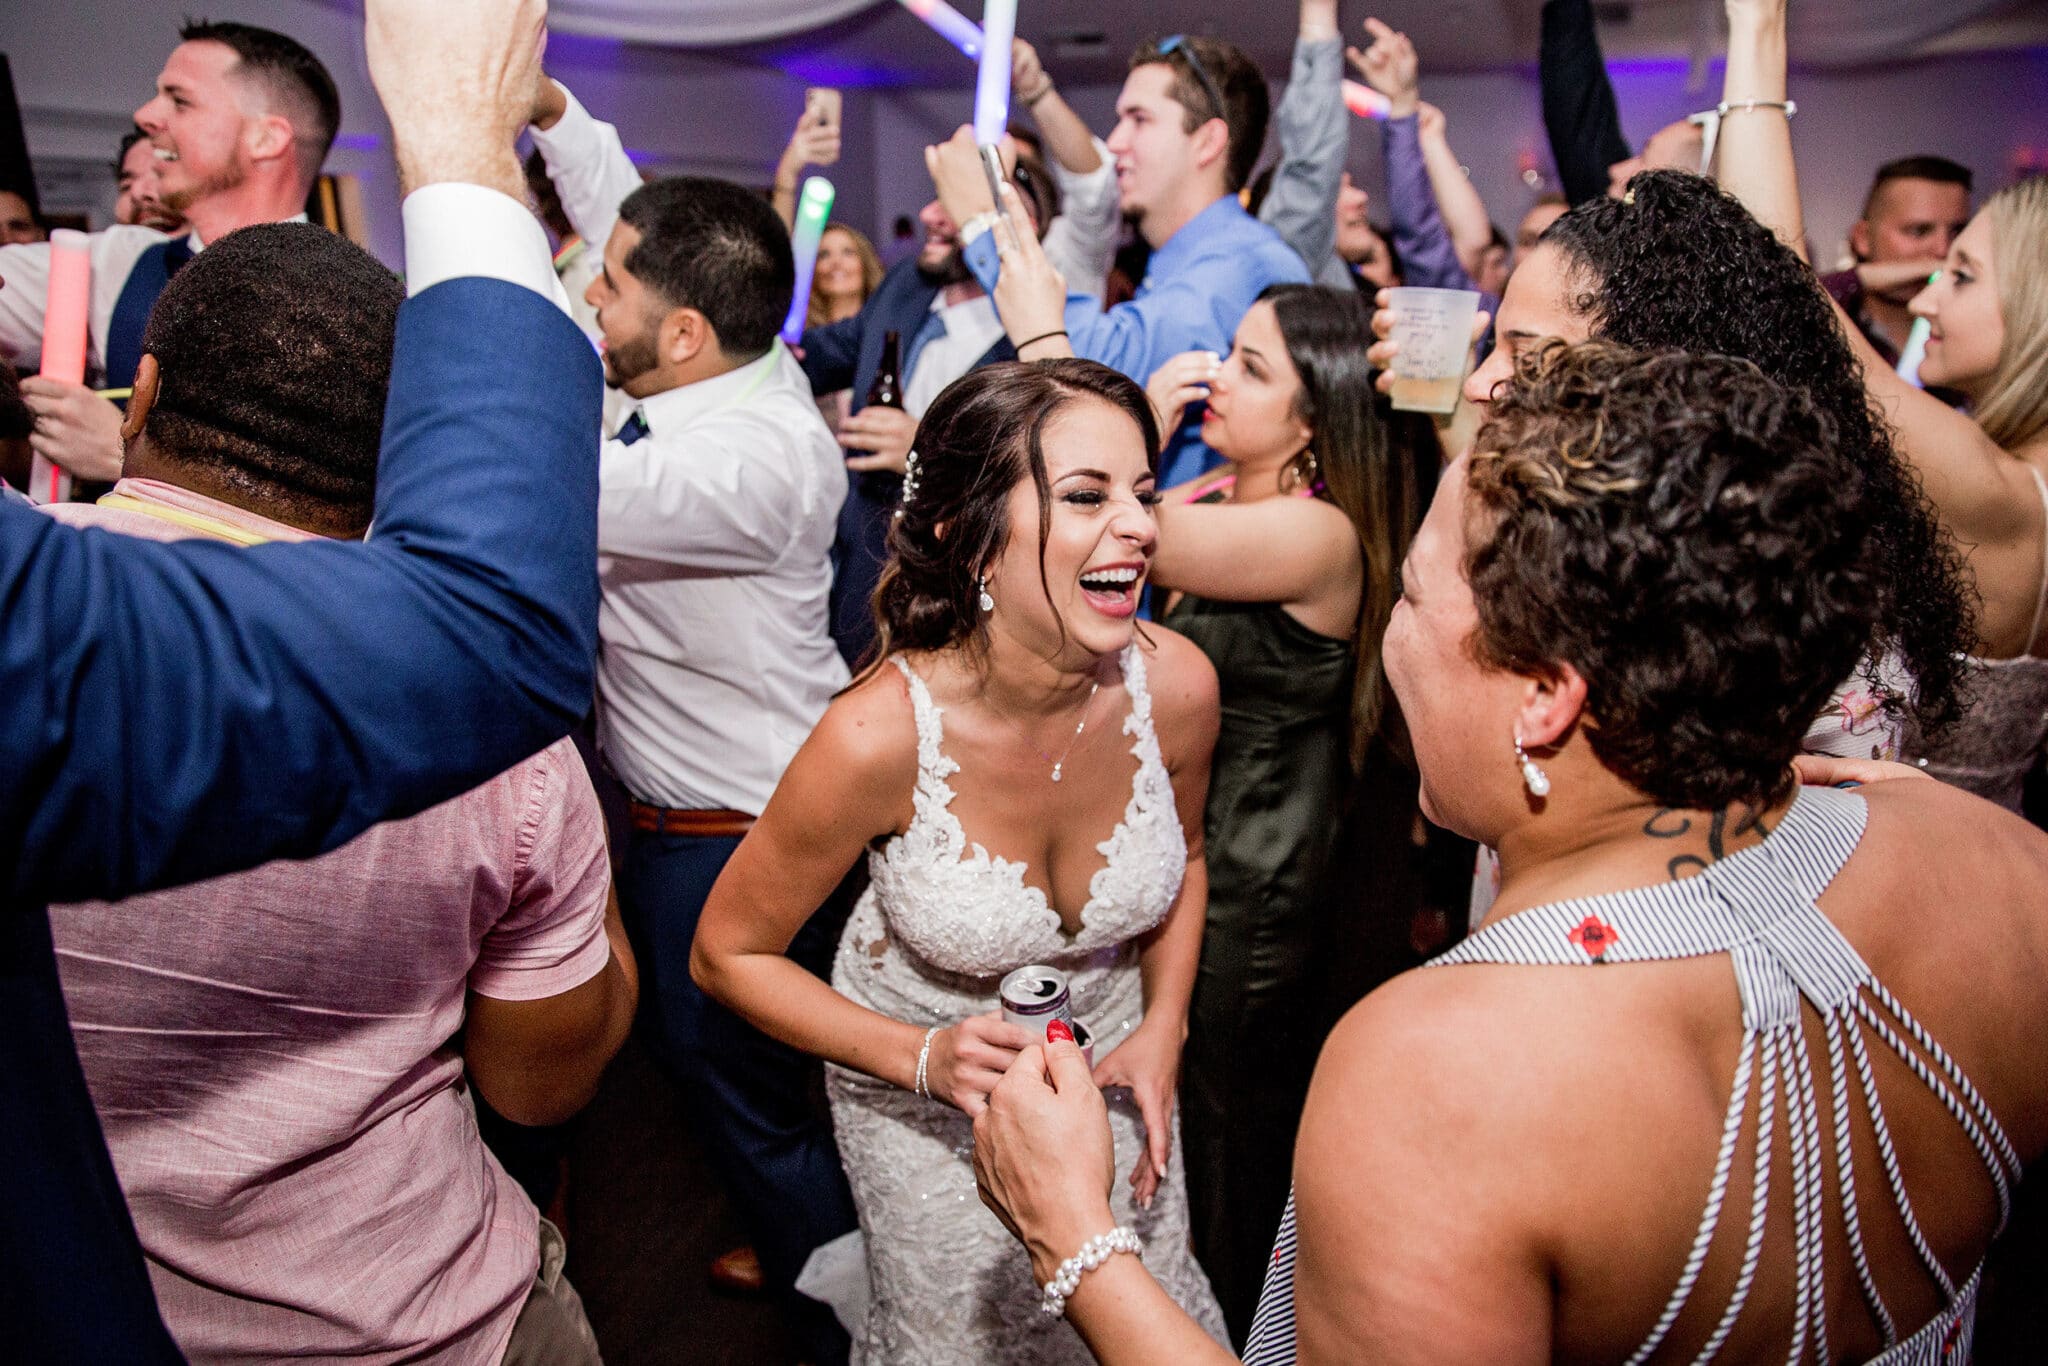 bride laughing with drink in hand in the middle of guests dancing at wedding reception